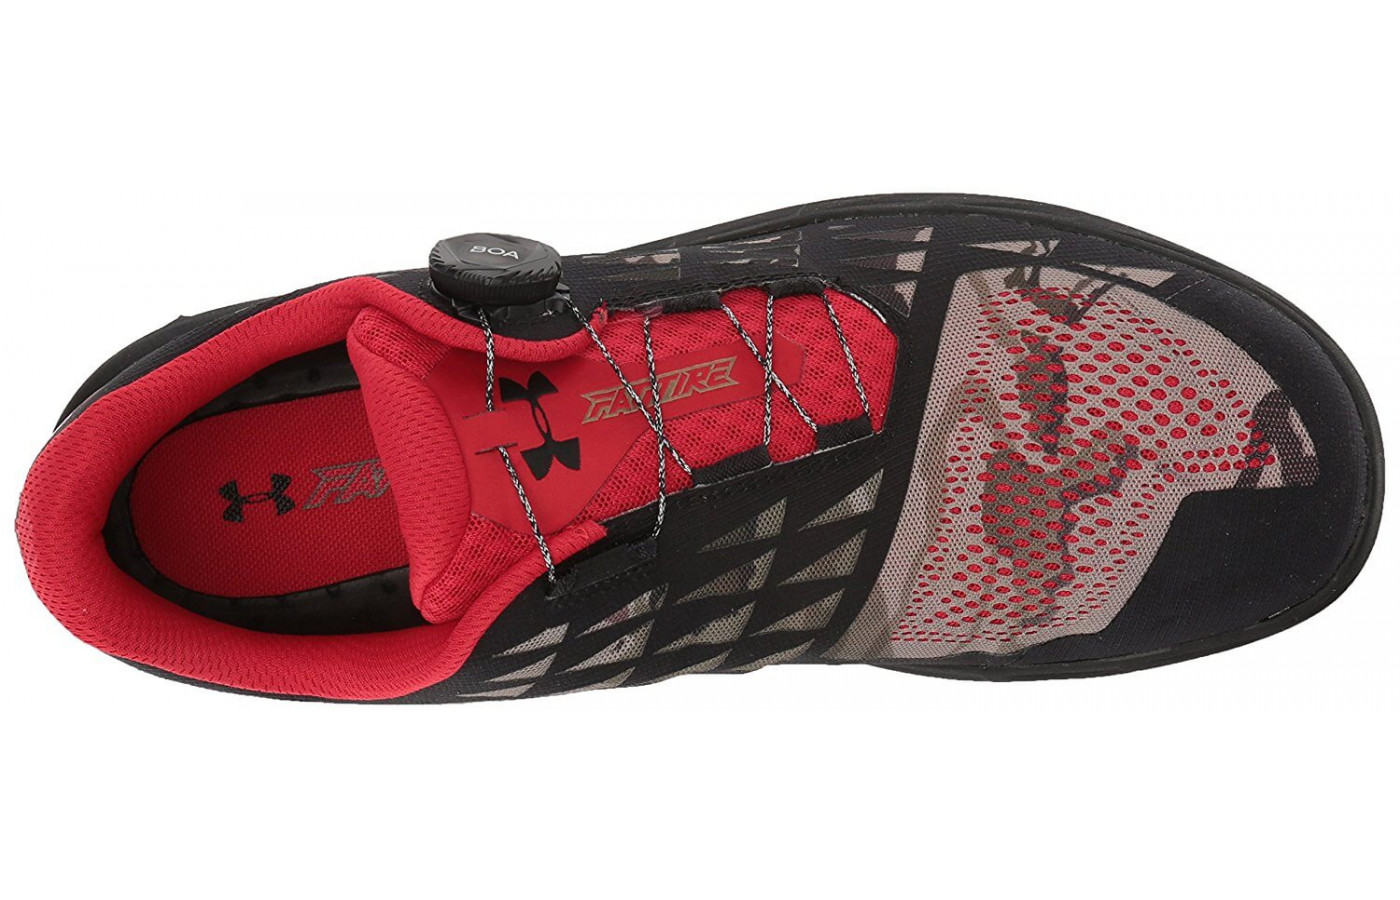 The Under Armour Fat Tire 2 lacing system